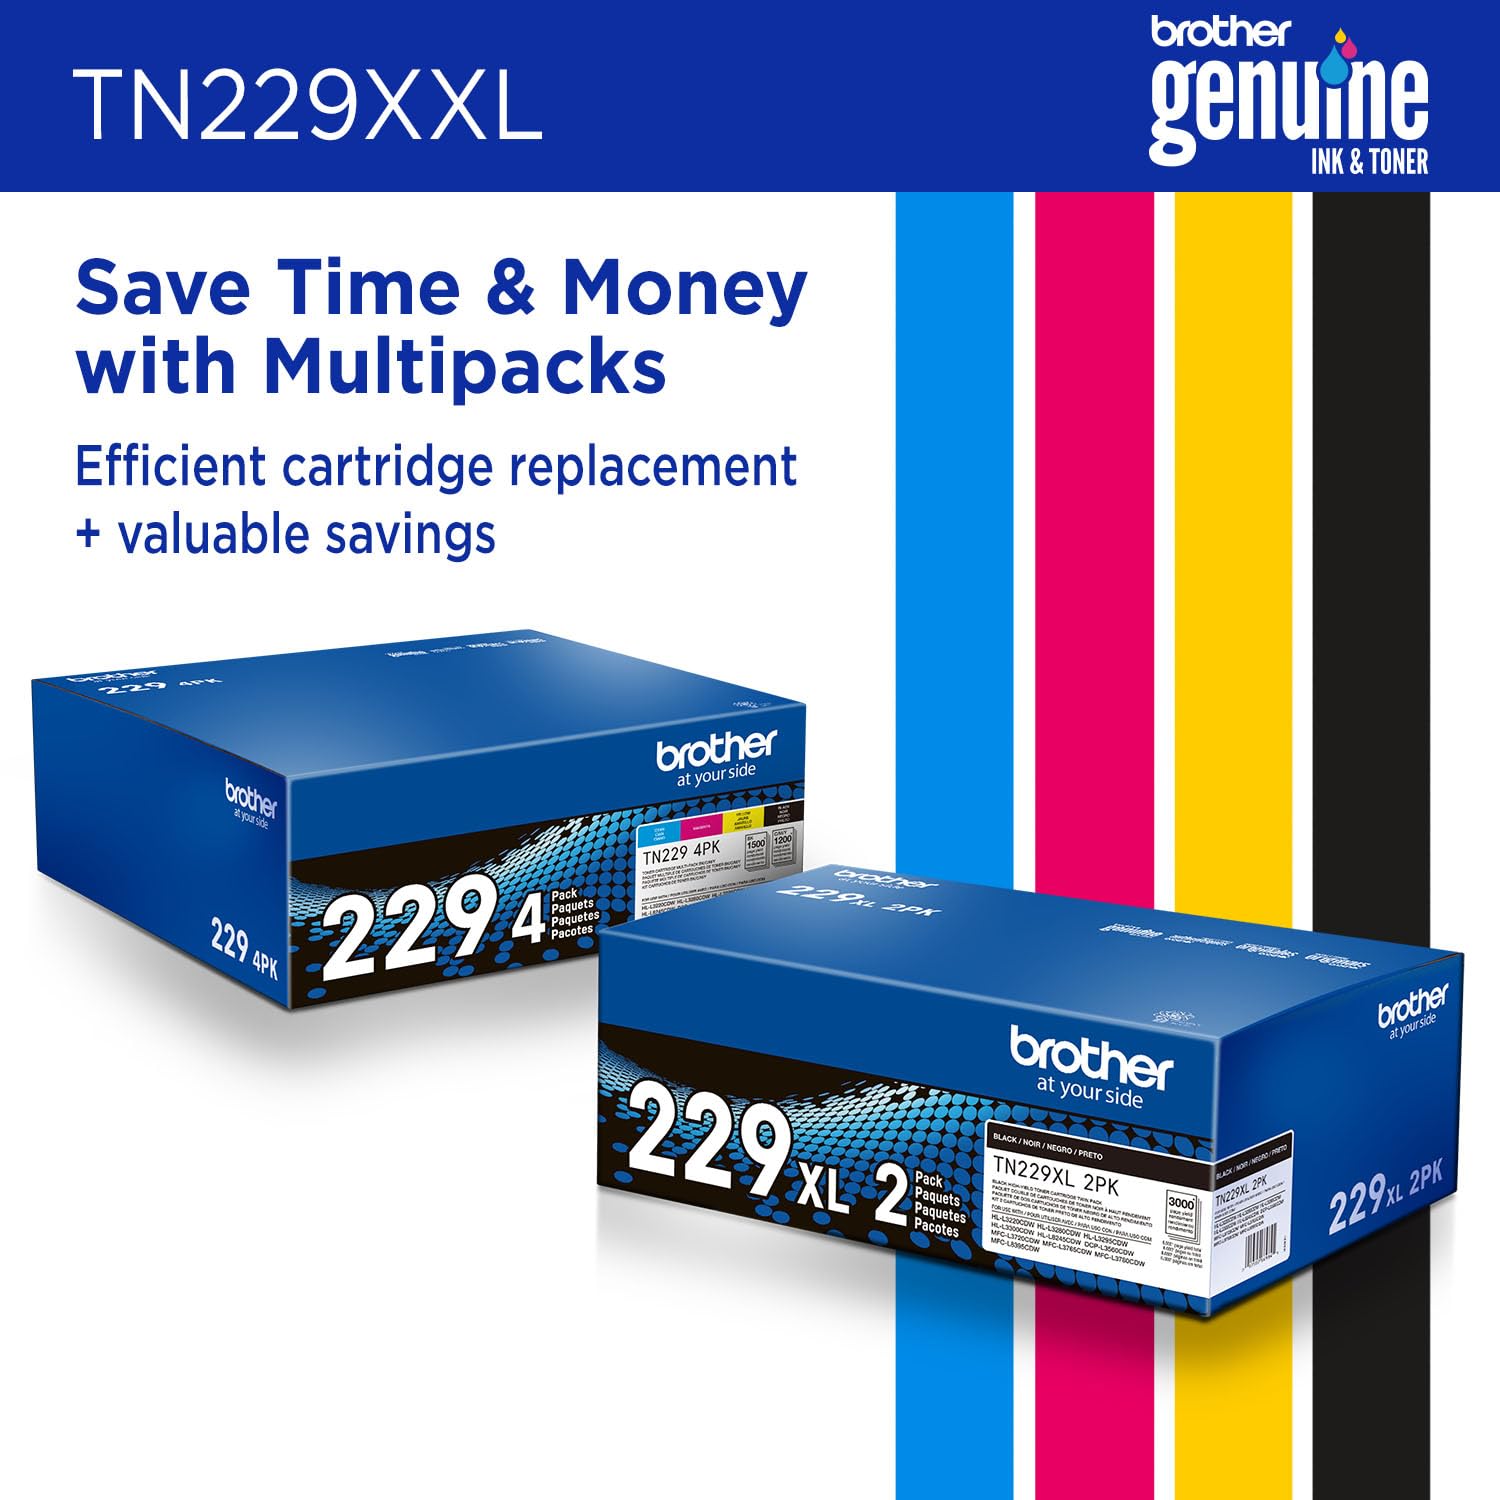 Brother Genuine TN229XXLM Magenta Super High Yield Printer Toner Cartridge - Print up to 4,000 Pages(1)